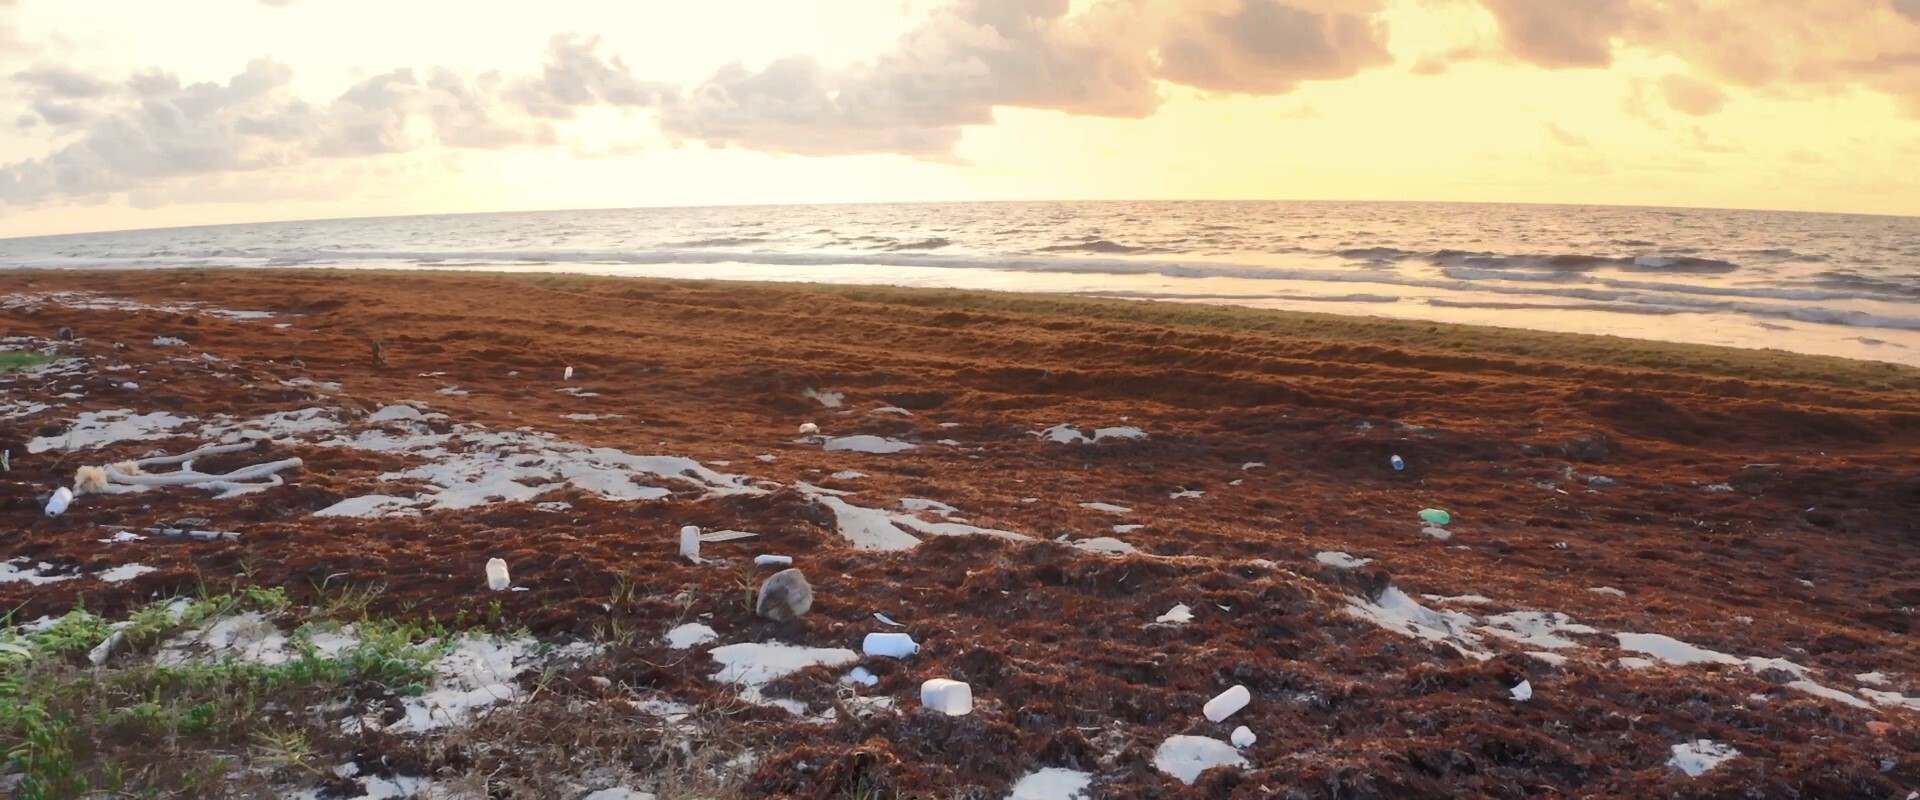 Imagine a world free of plastic - Corona cleans up beaches around the world